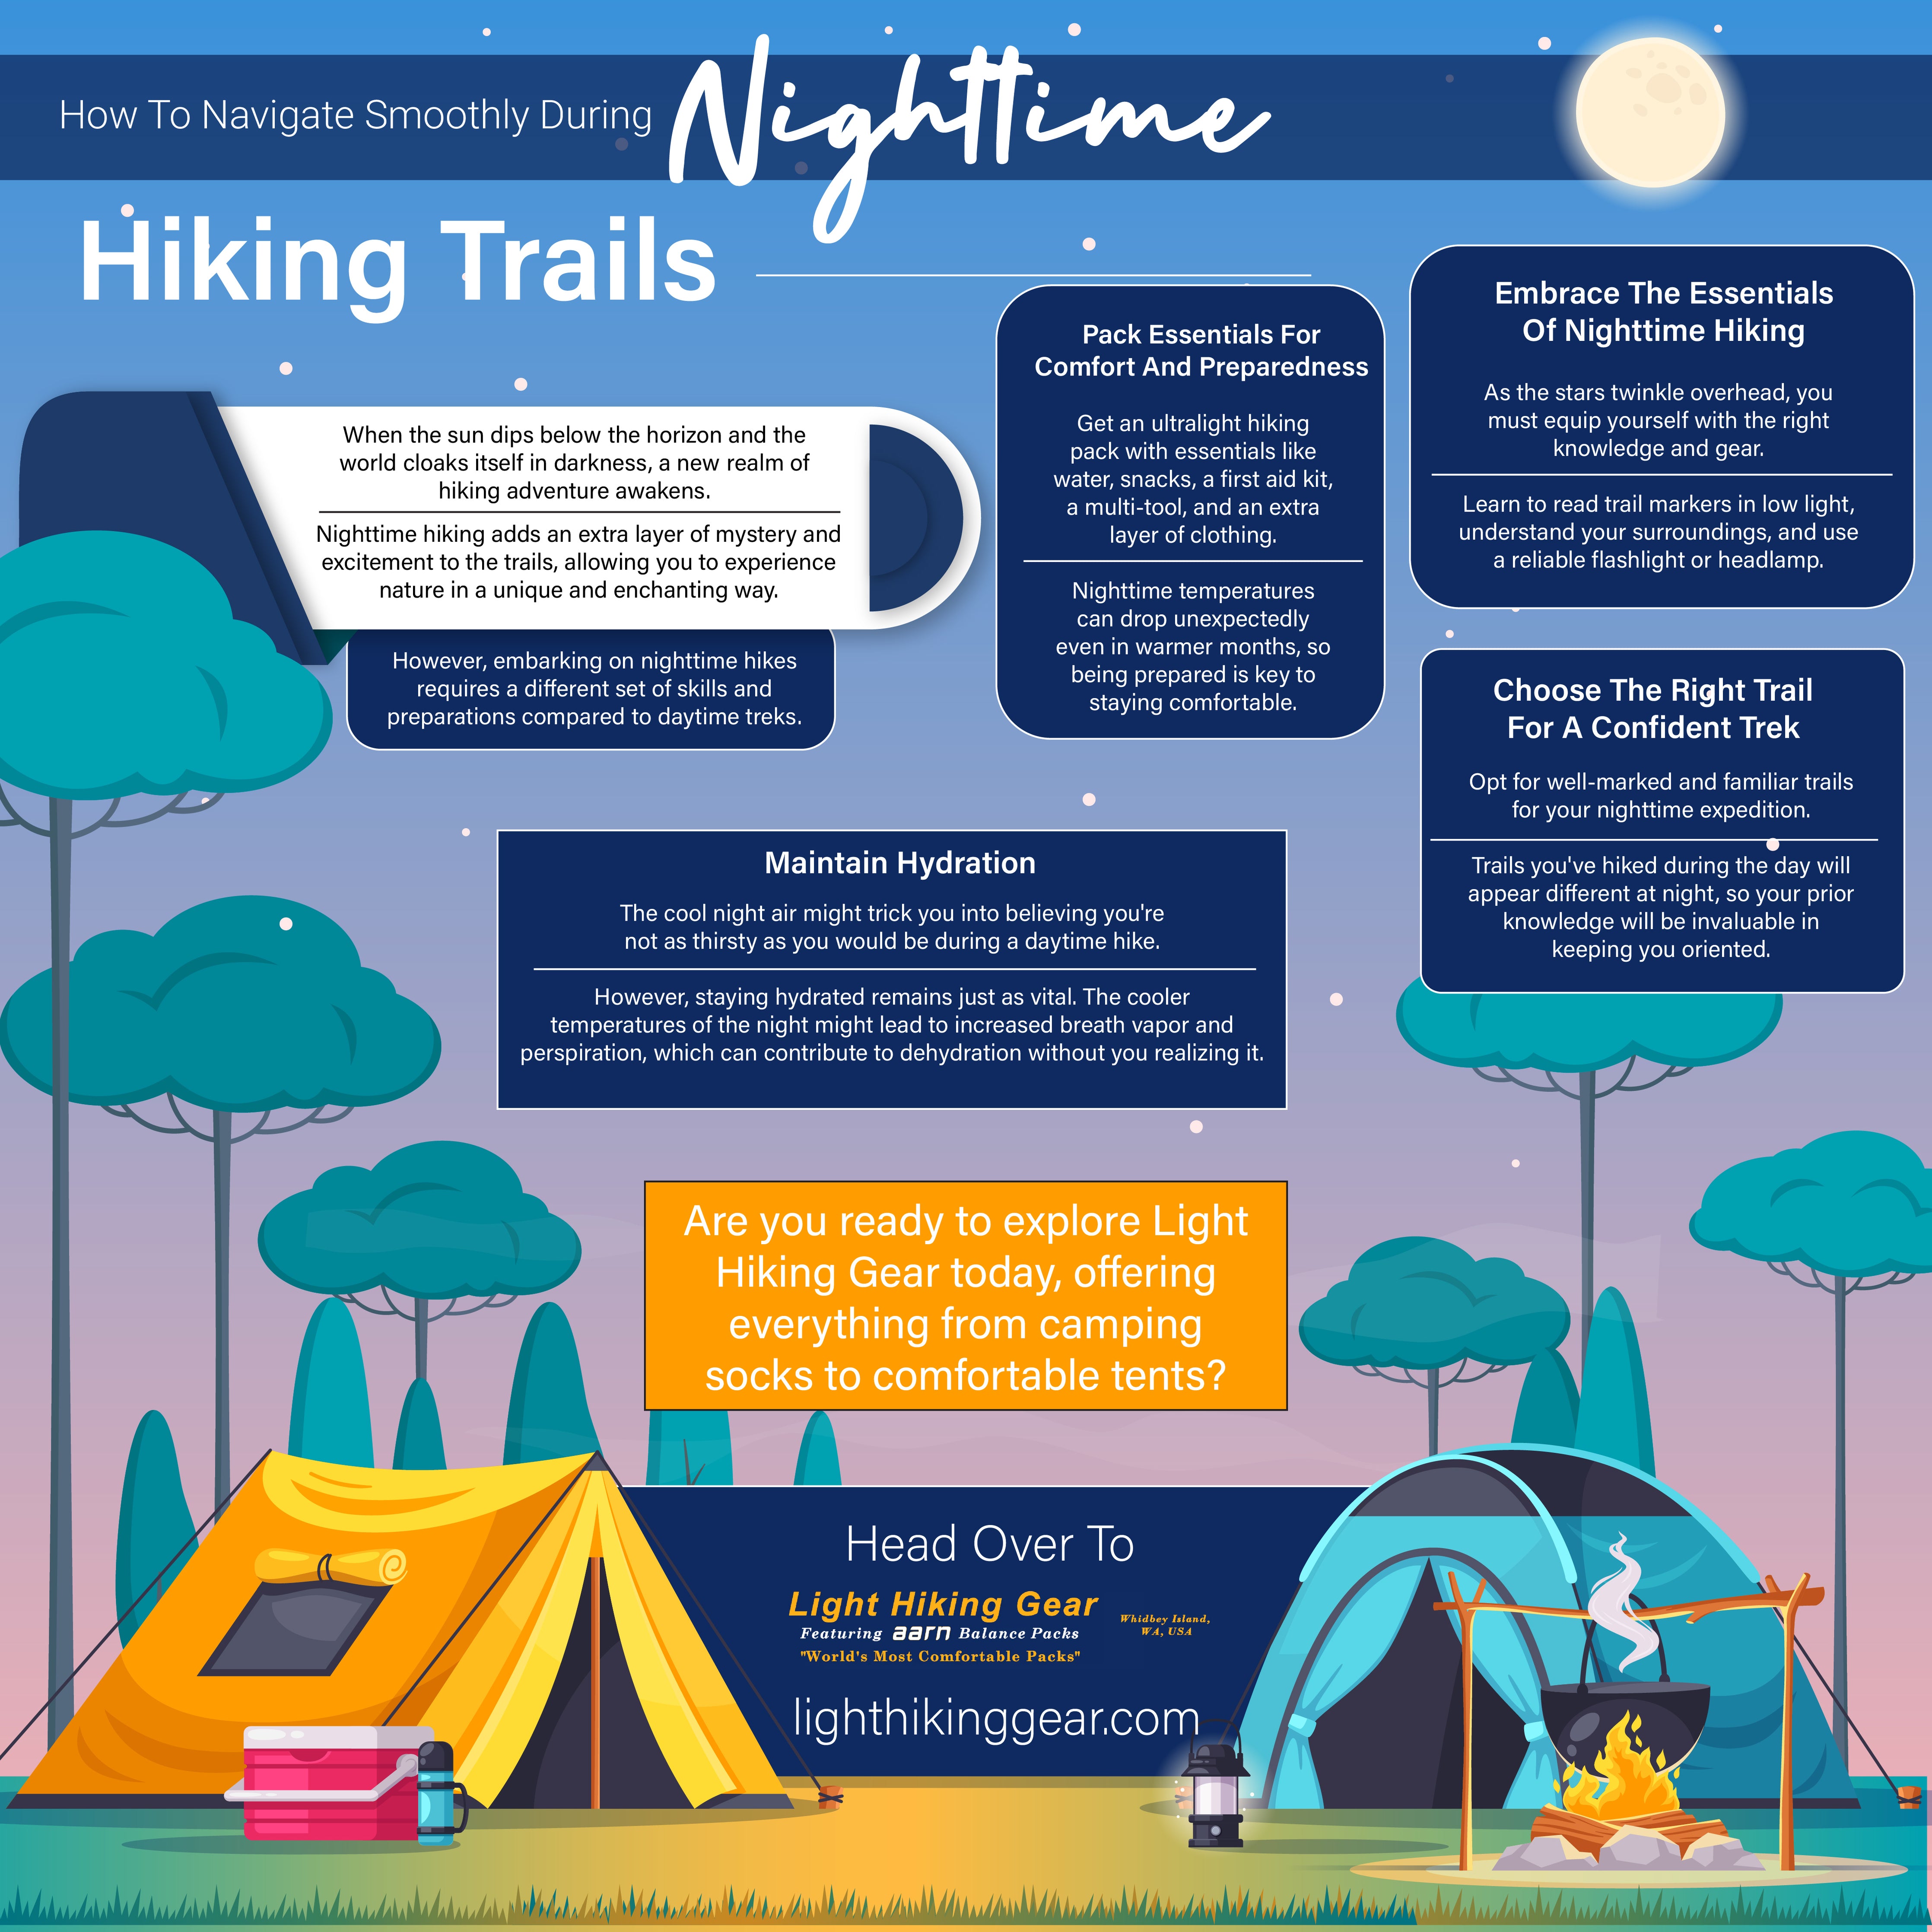 How to Navigate Smoothly During Nighttime Hiking Trails